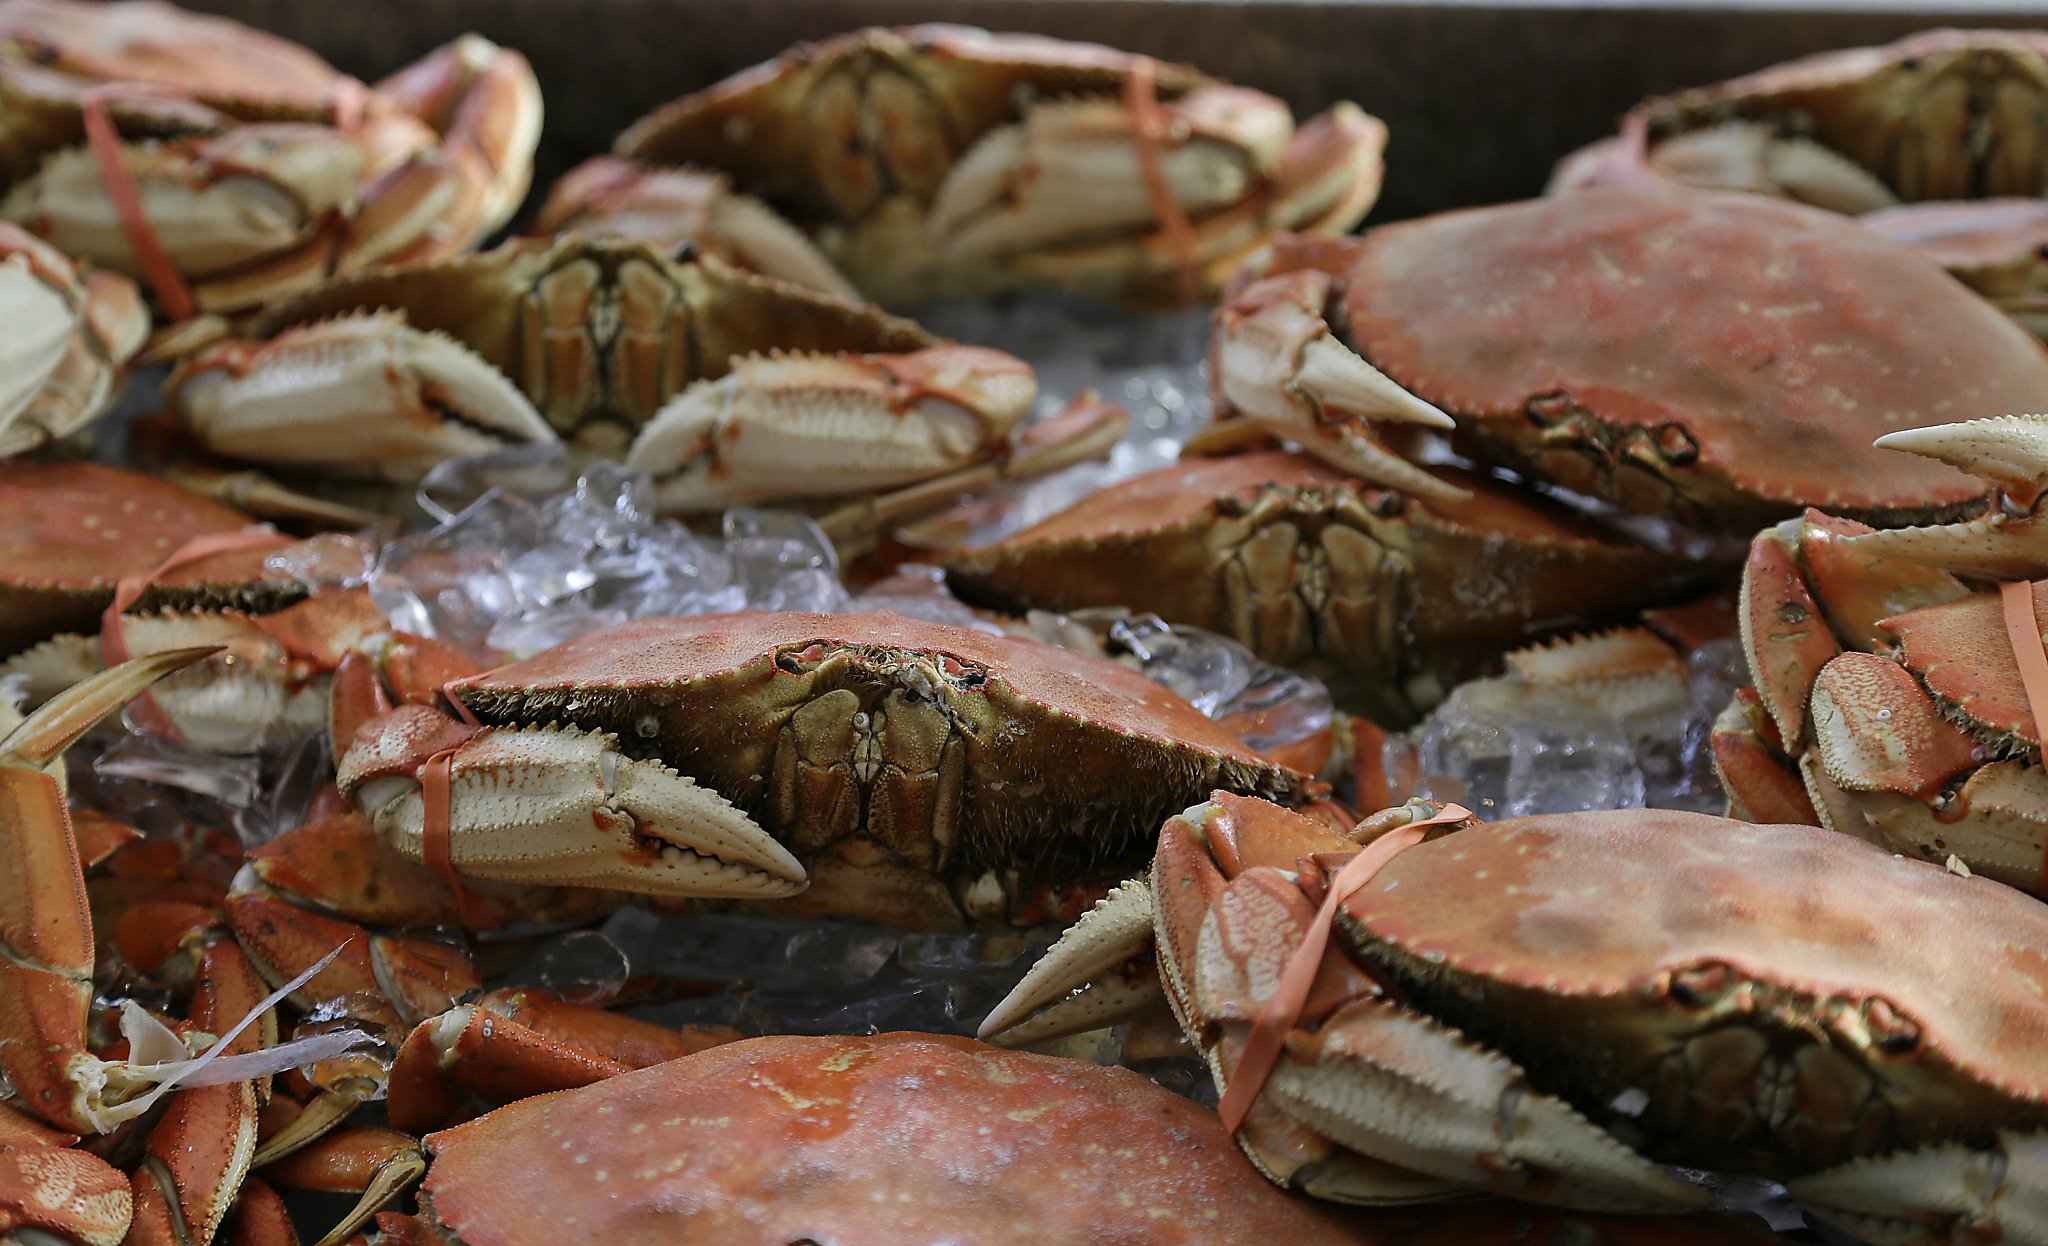 Consumers Warned To Avoid Eating Rock Crabs, Bivalve Shellfish - SFGate2048 x 1246